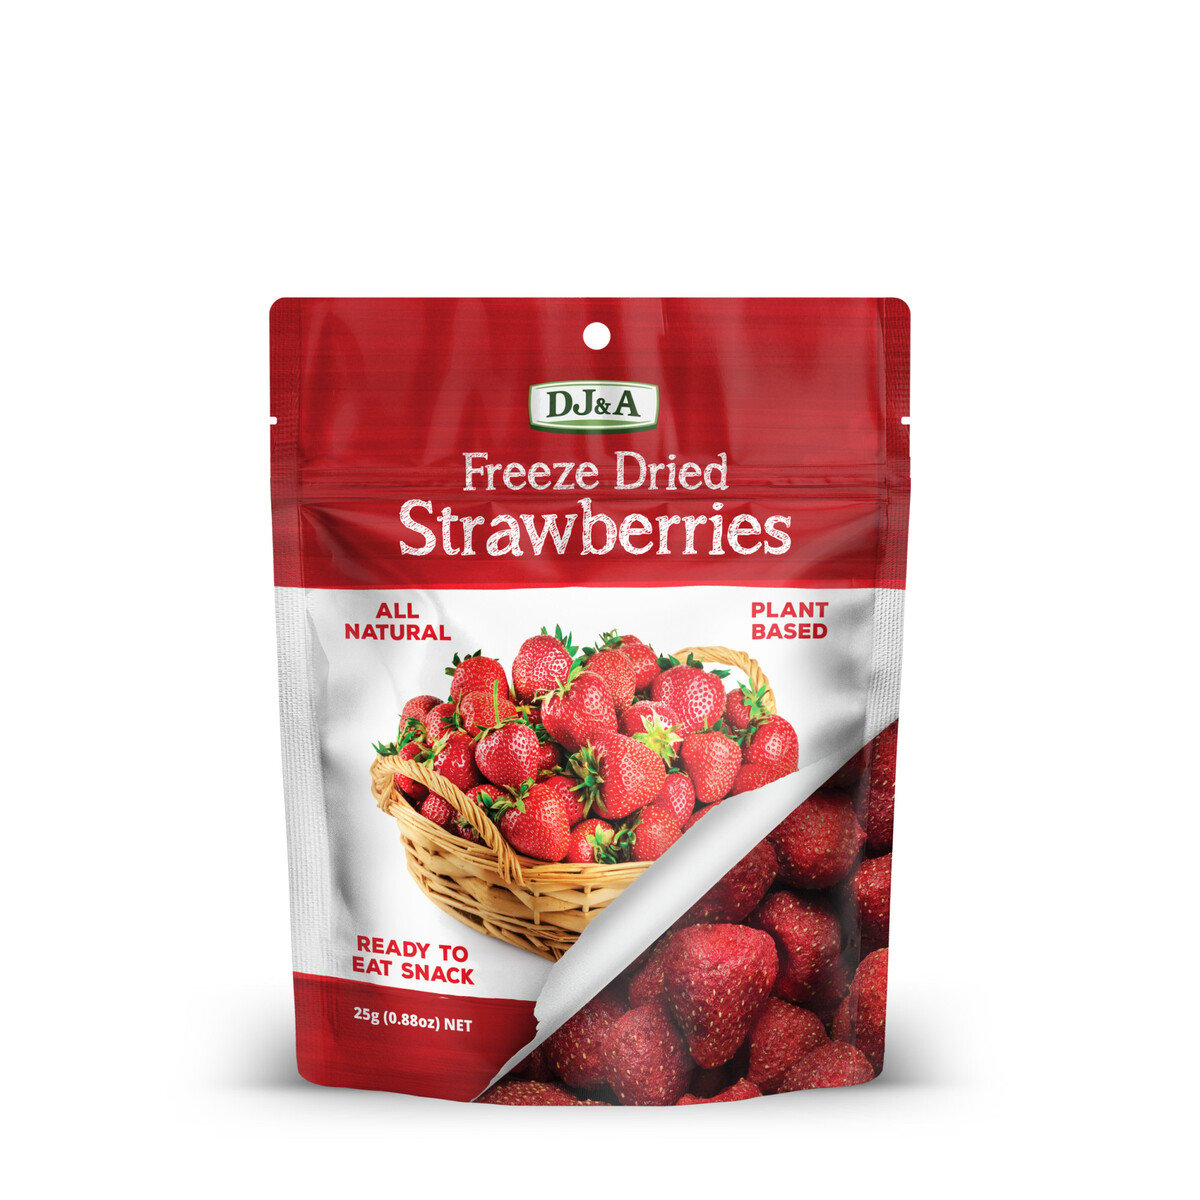 Buy DJ&A Freeze Dried Strawberries 25 g Online at Best Price | Imported for you | Lulu Kuwait in Kuwait